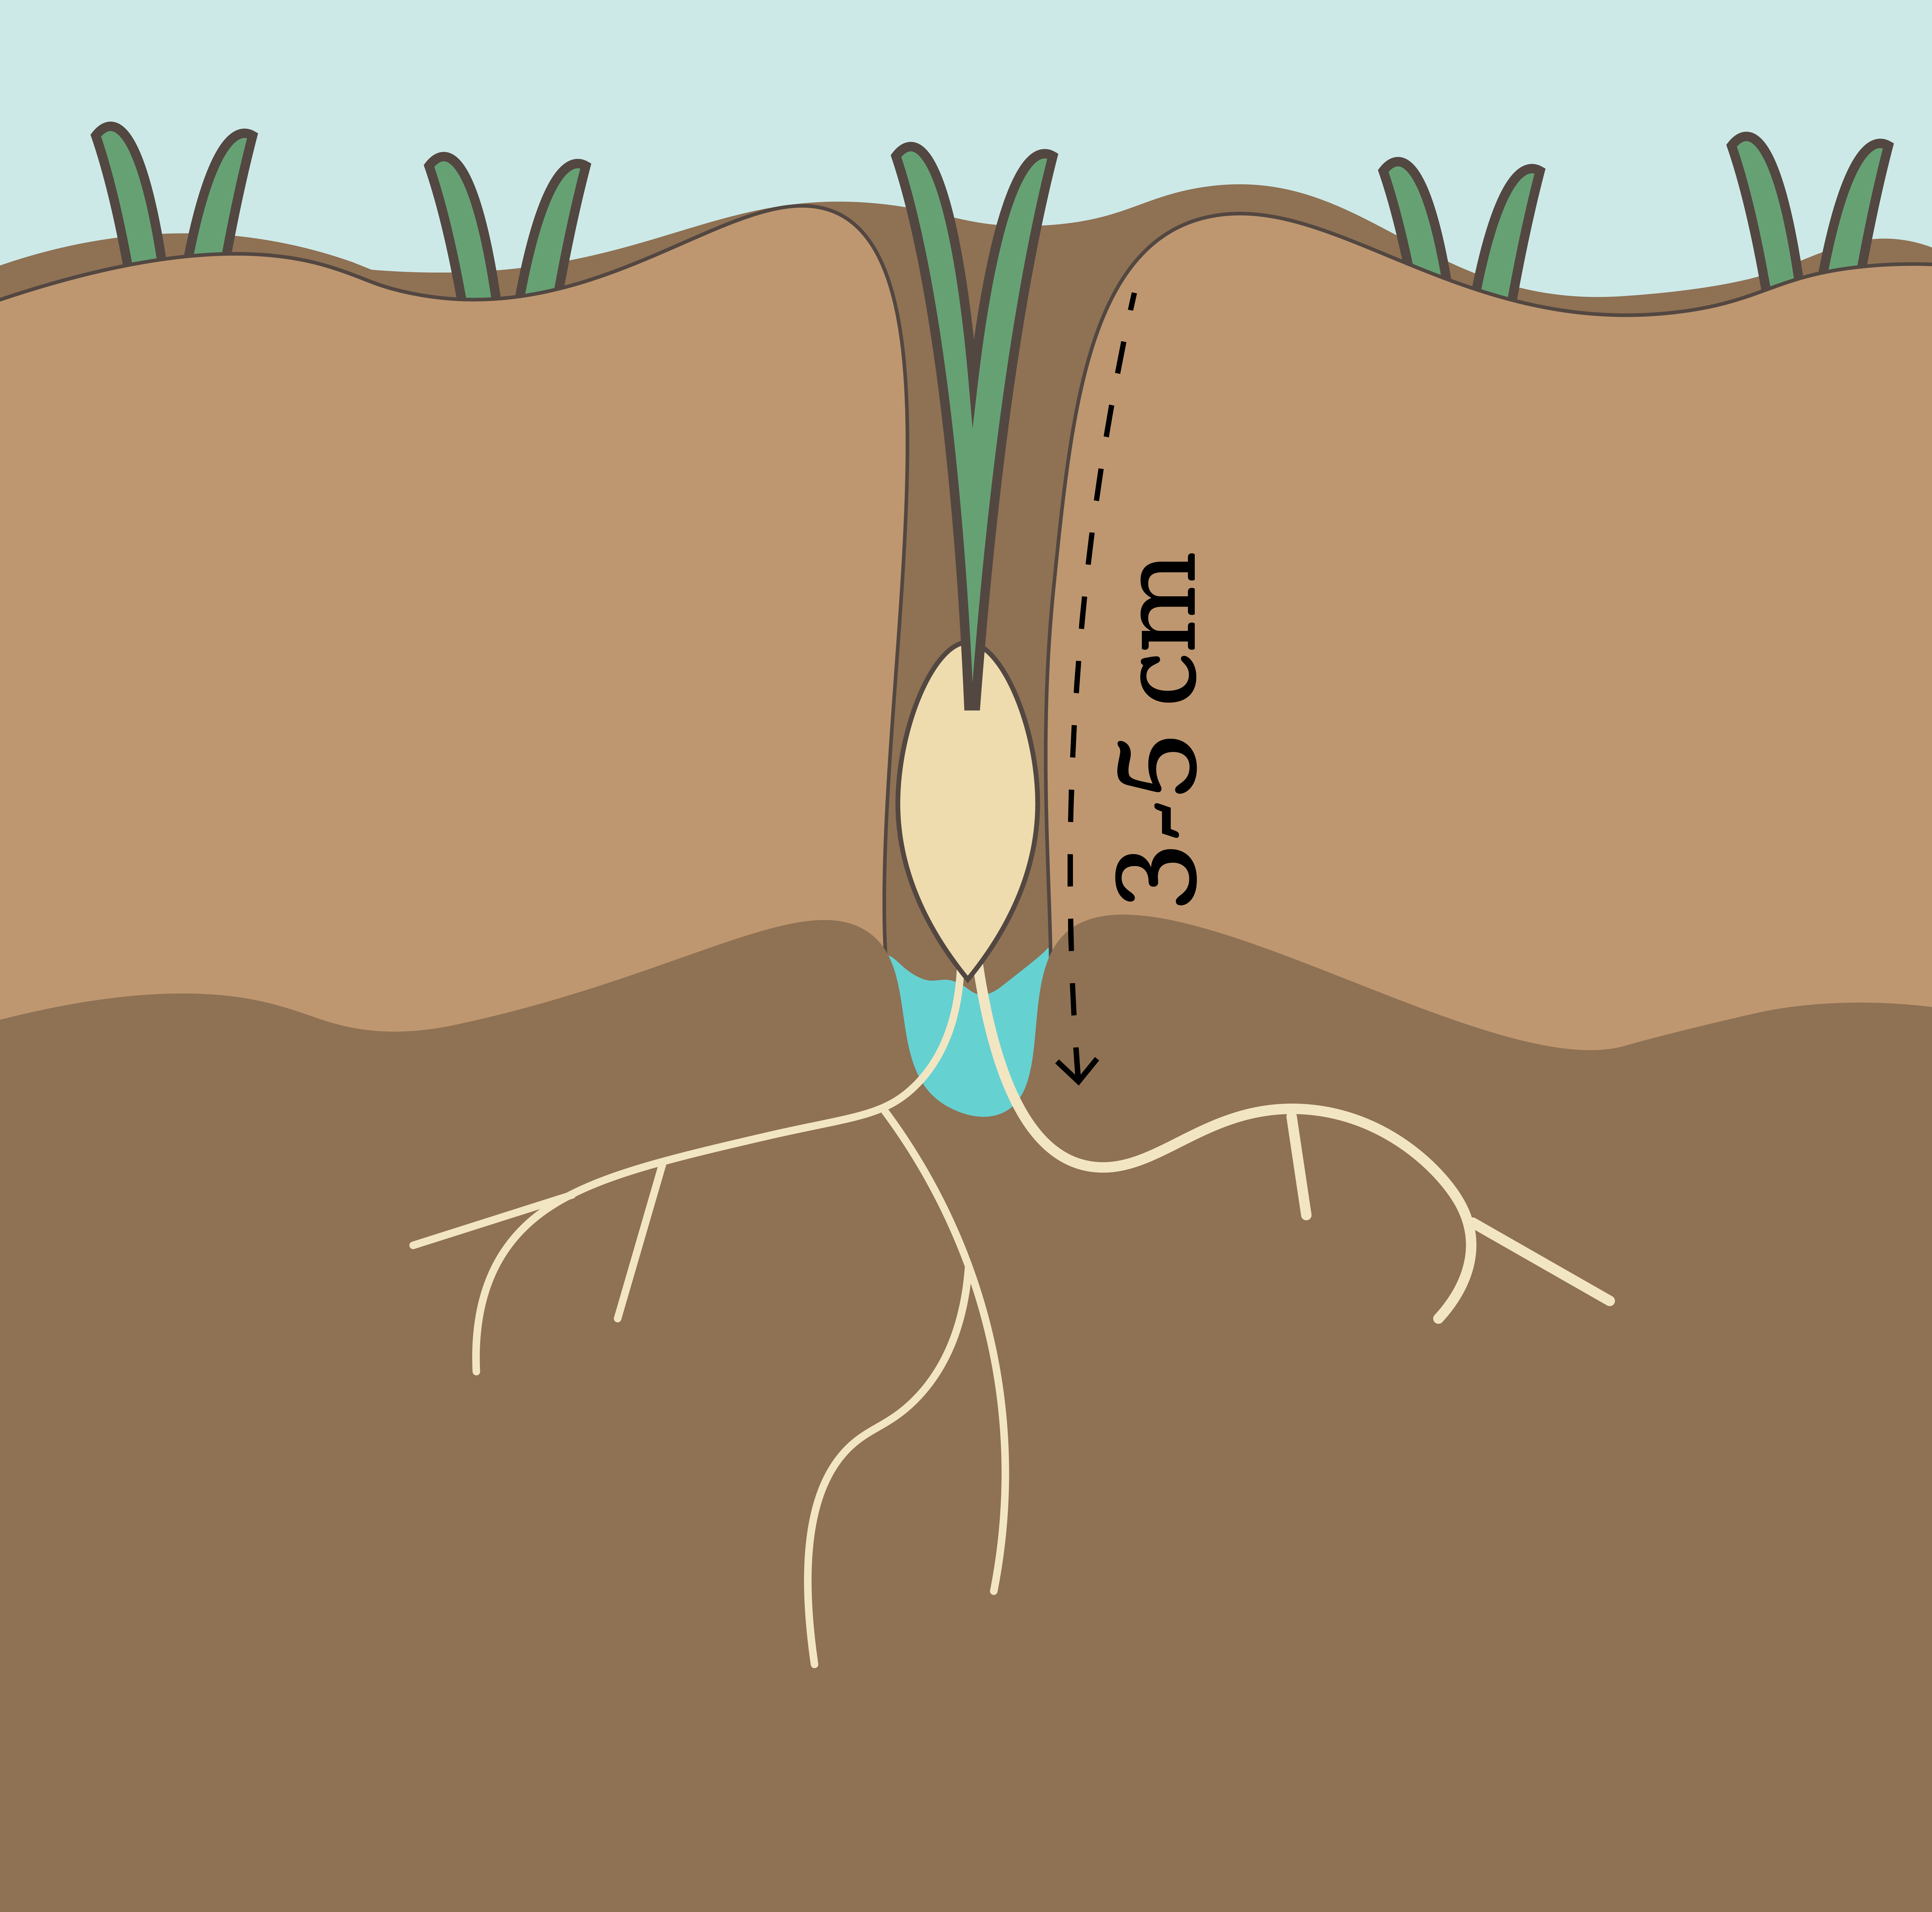 An illustration of how barley grows 